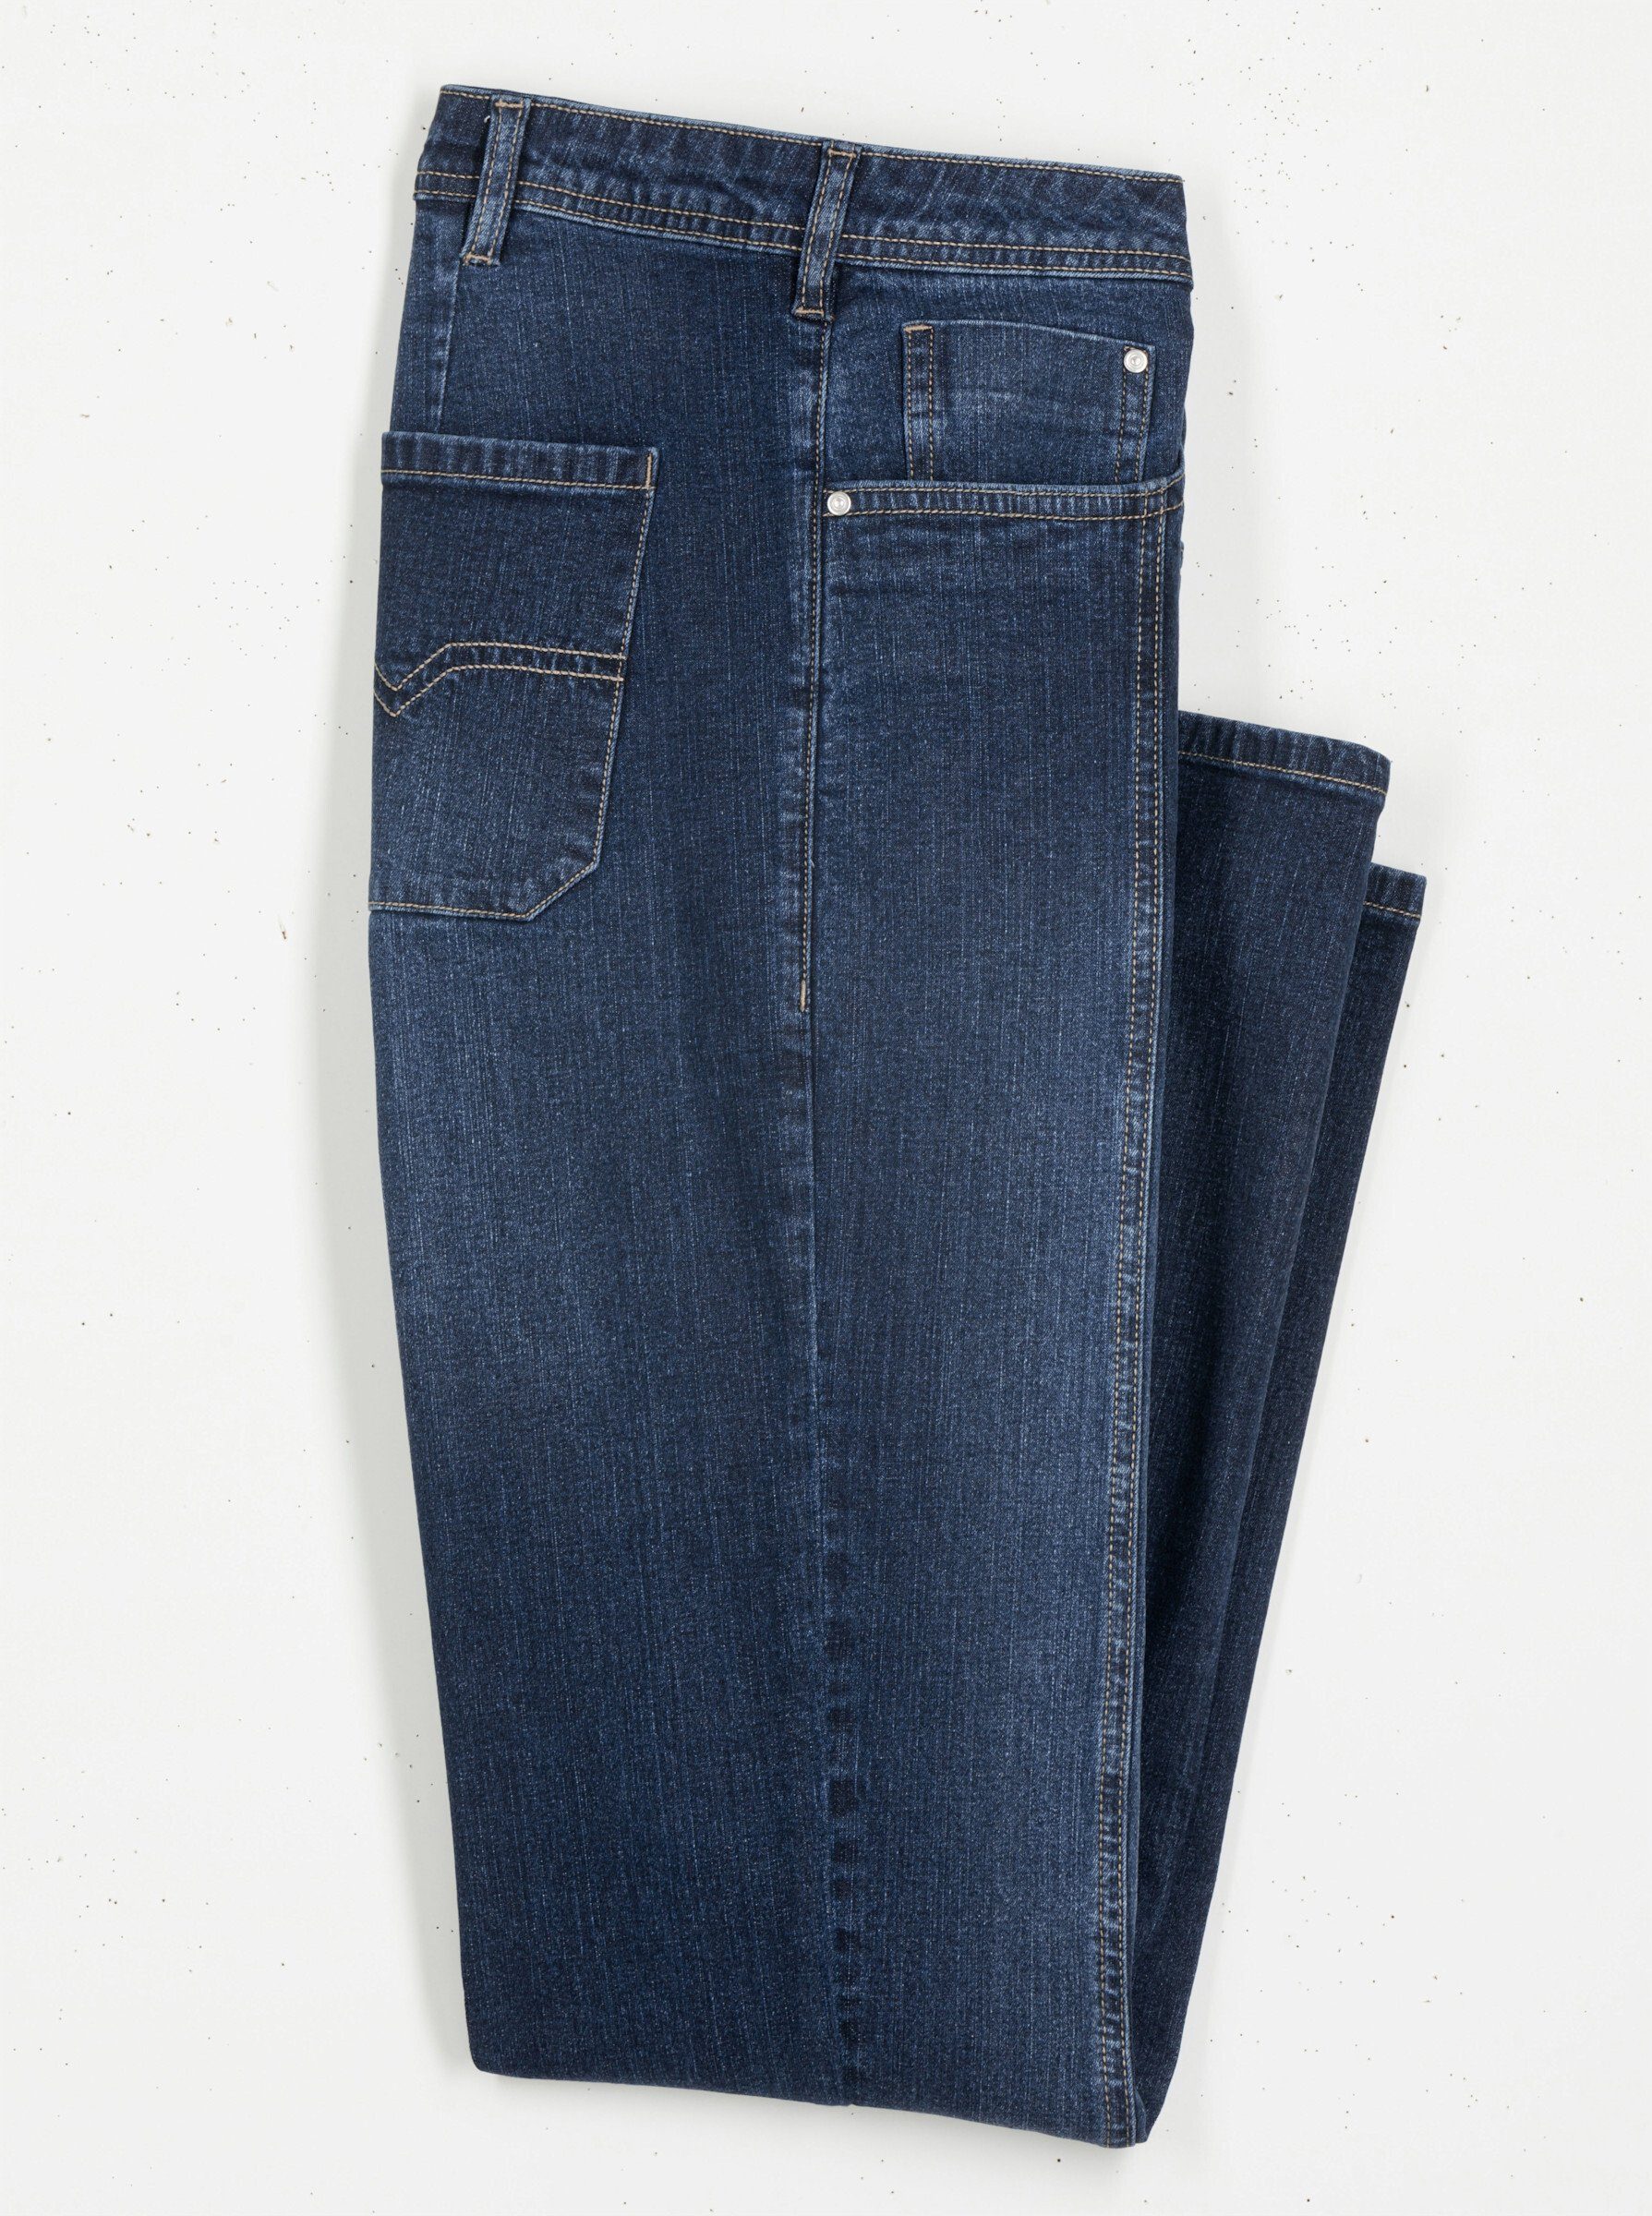 Sieh an! Jeans Bequeme blue-stone-washed